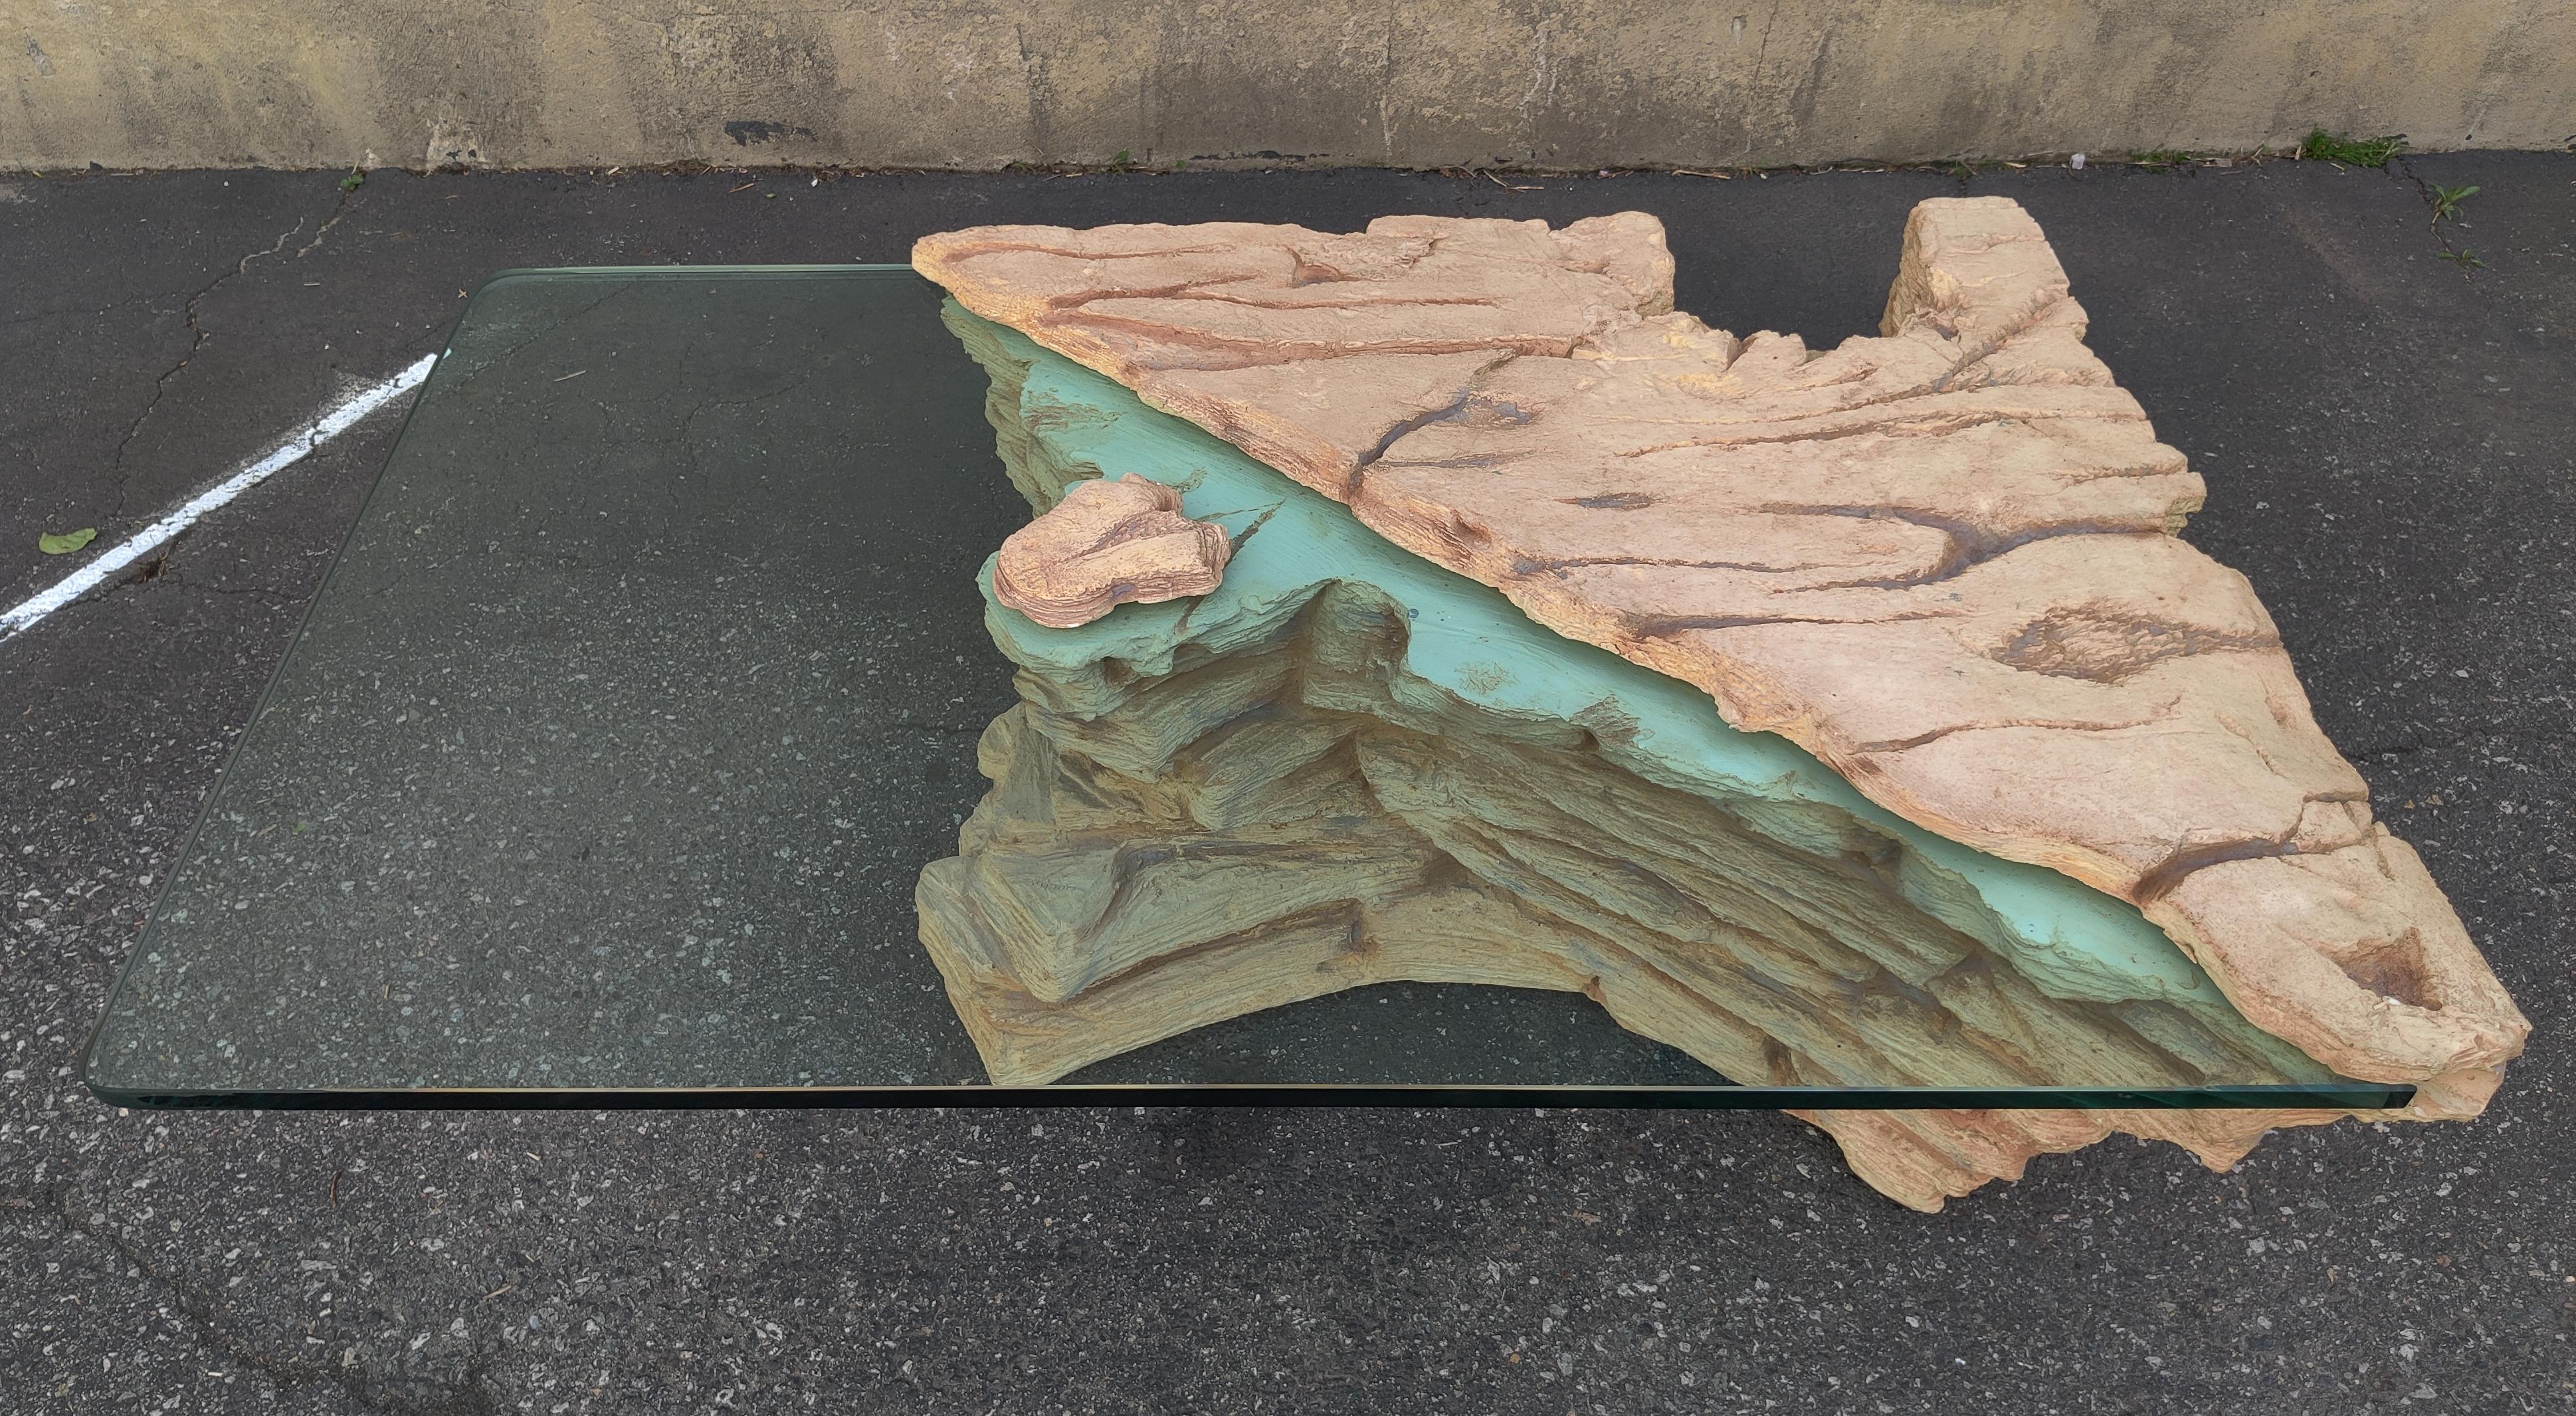 Sirmos attribution 'Rock Quarry' coffee table. Made in the US circa 1970s. 3/4 inch thick glass top fits invisibly in a groove in the body of the base and is held down with a rock that makes it seem like the base is coming through the glass top.